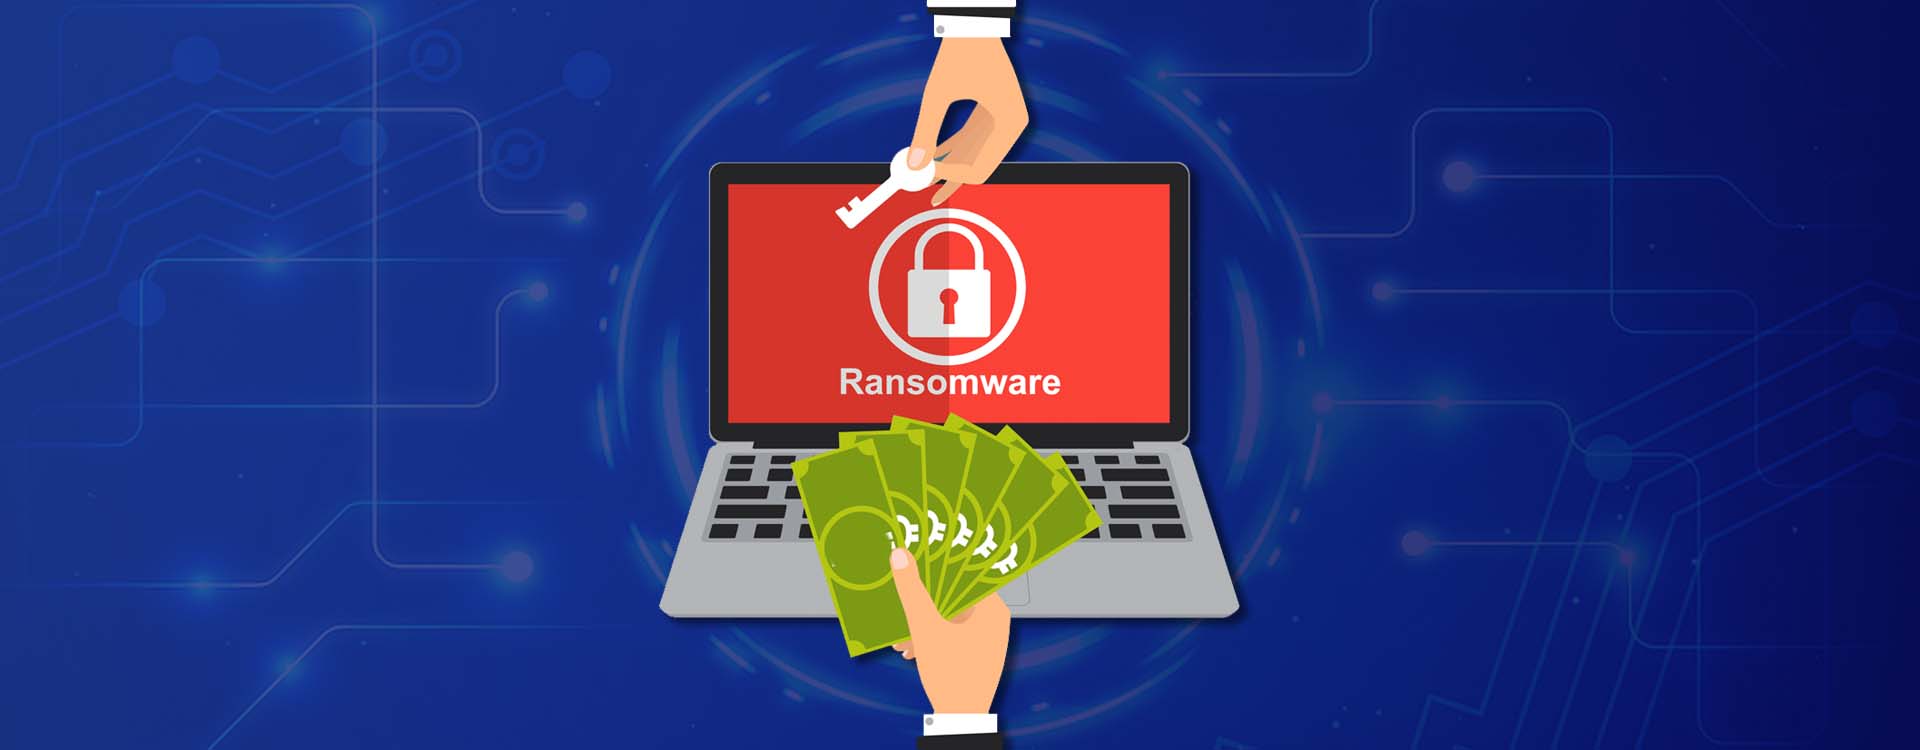 Ransomware attacks locks the vital data of an organisation and ask for ransom in return to life the locks.